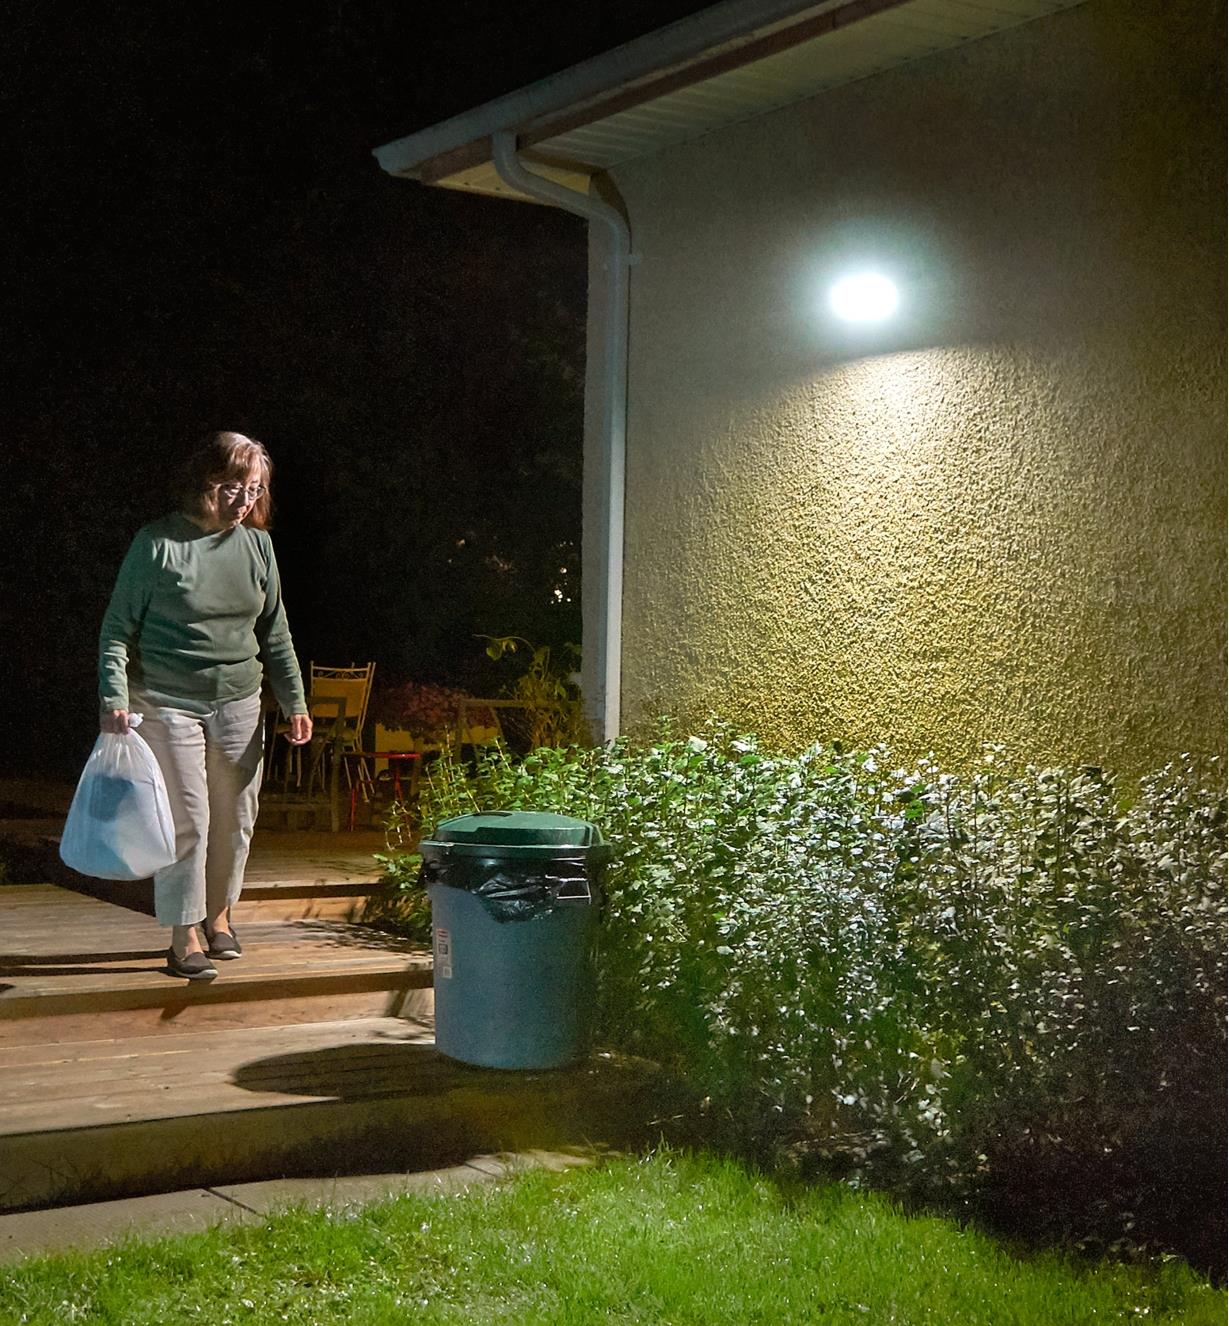 Motion-sensing solar LED floodlight activates as a figure approaches